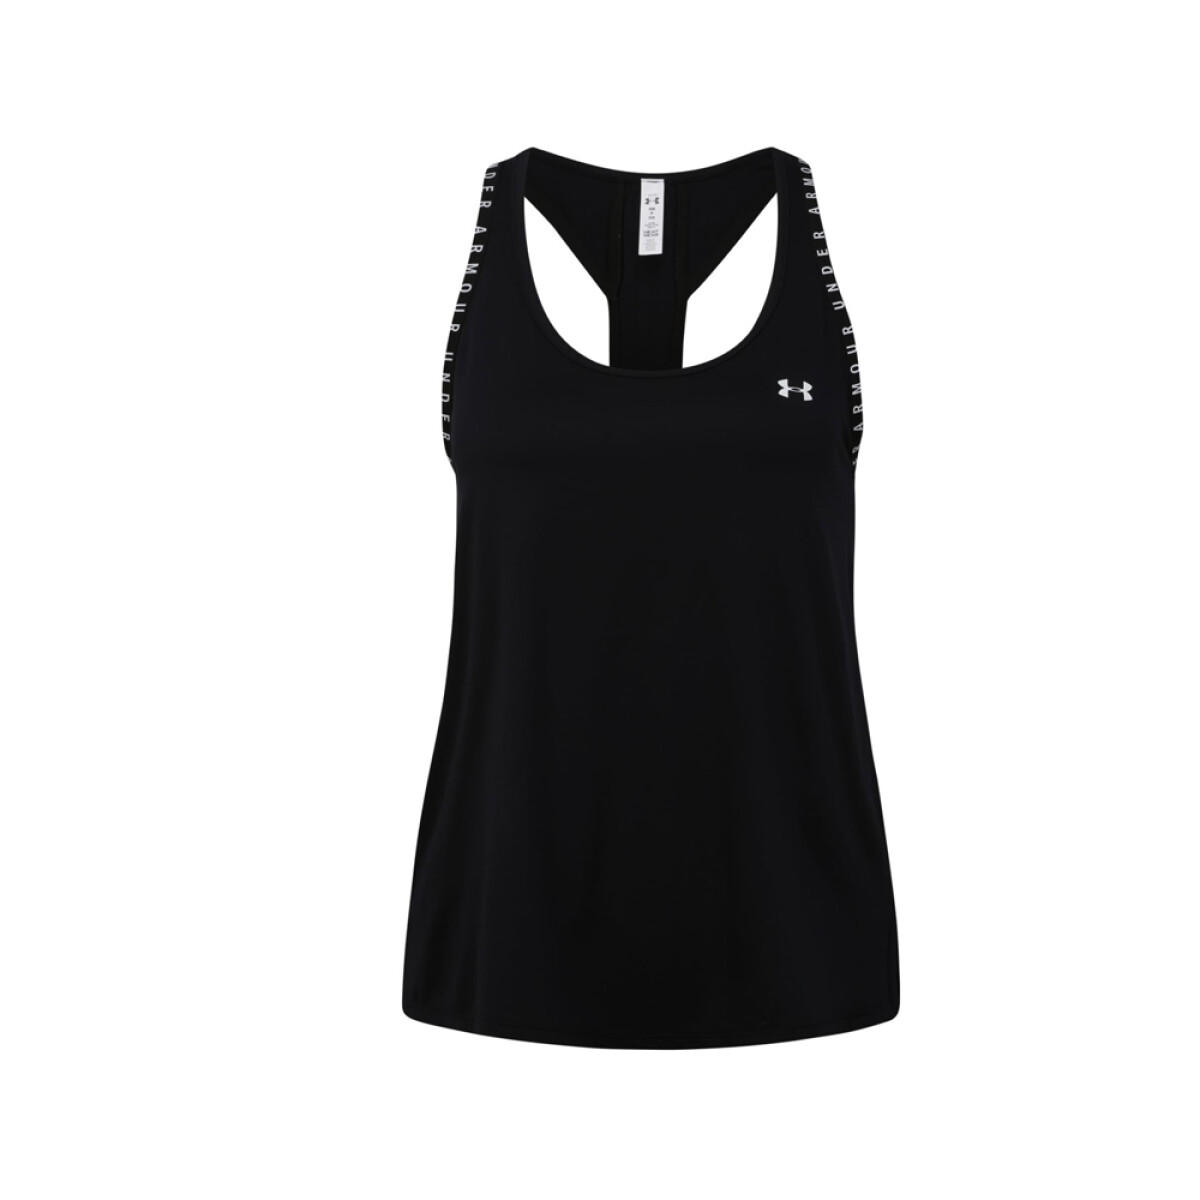 MUSCULOSA UNDER ARMOUR KNOCKOUT TANK - Black 